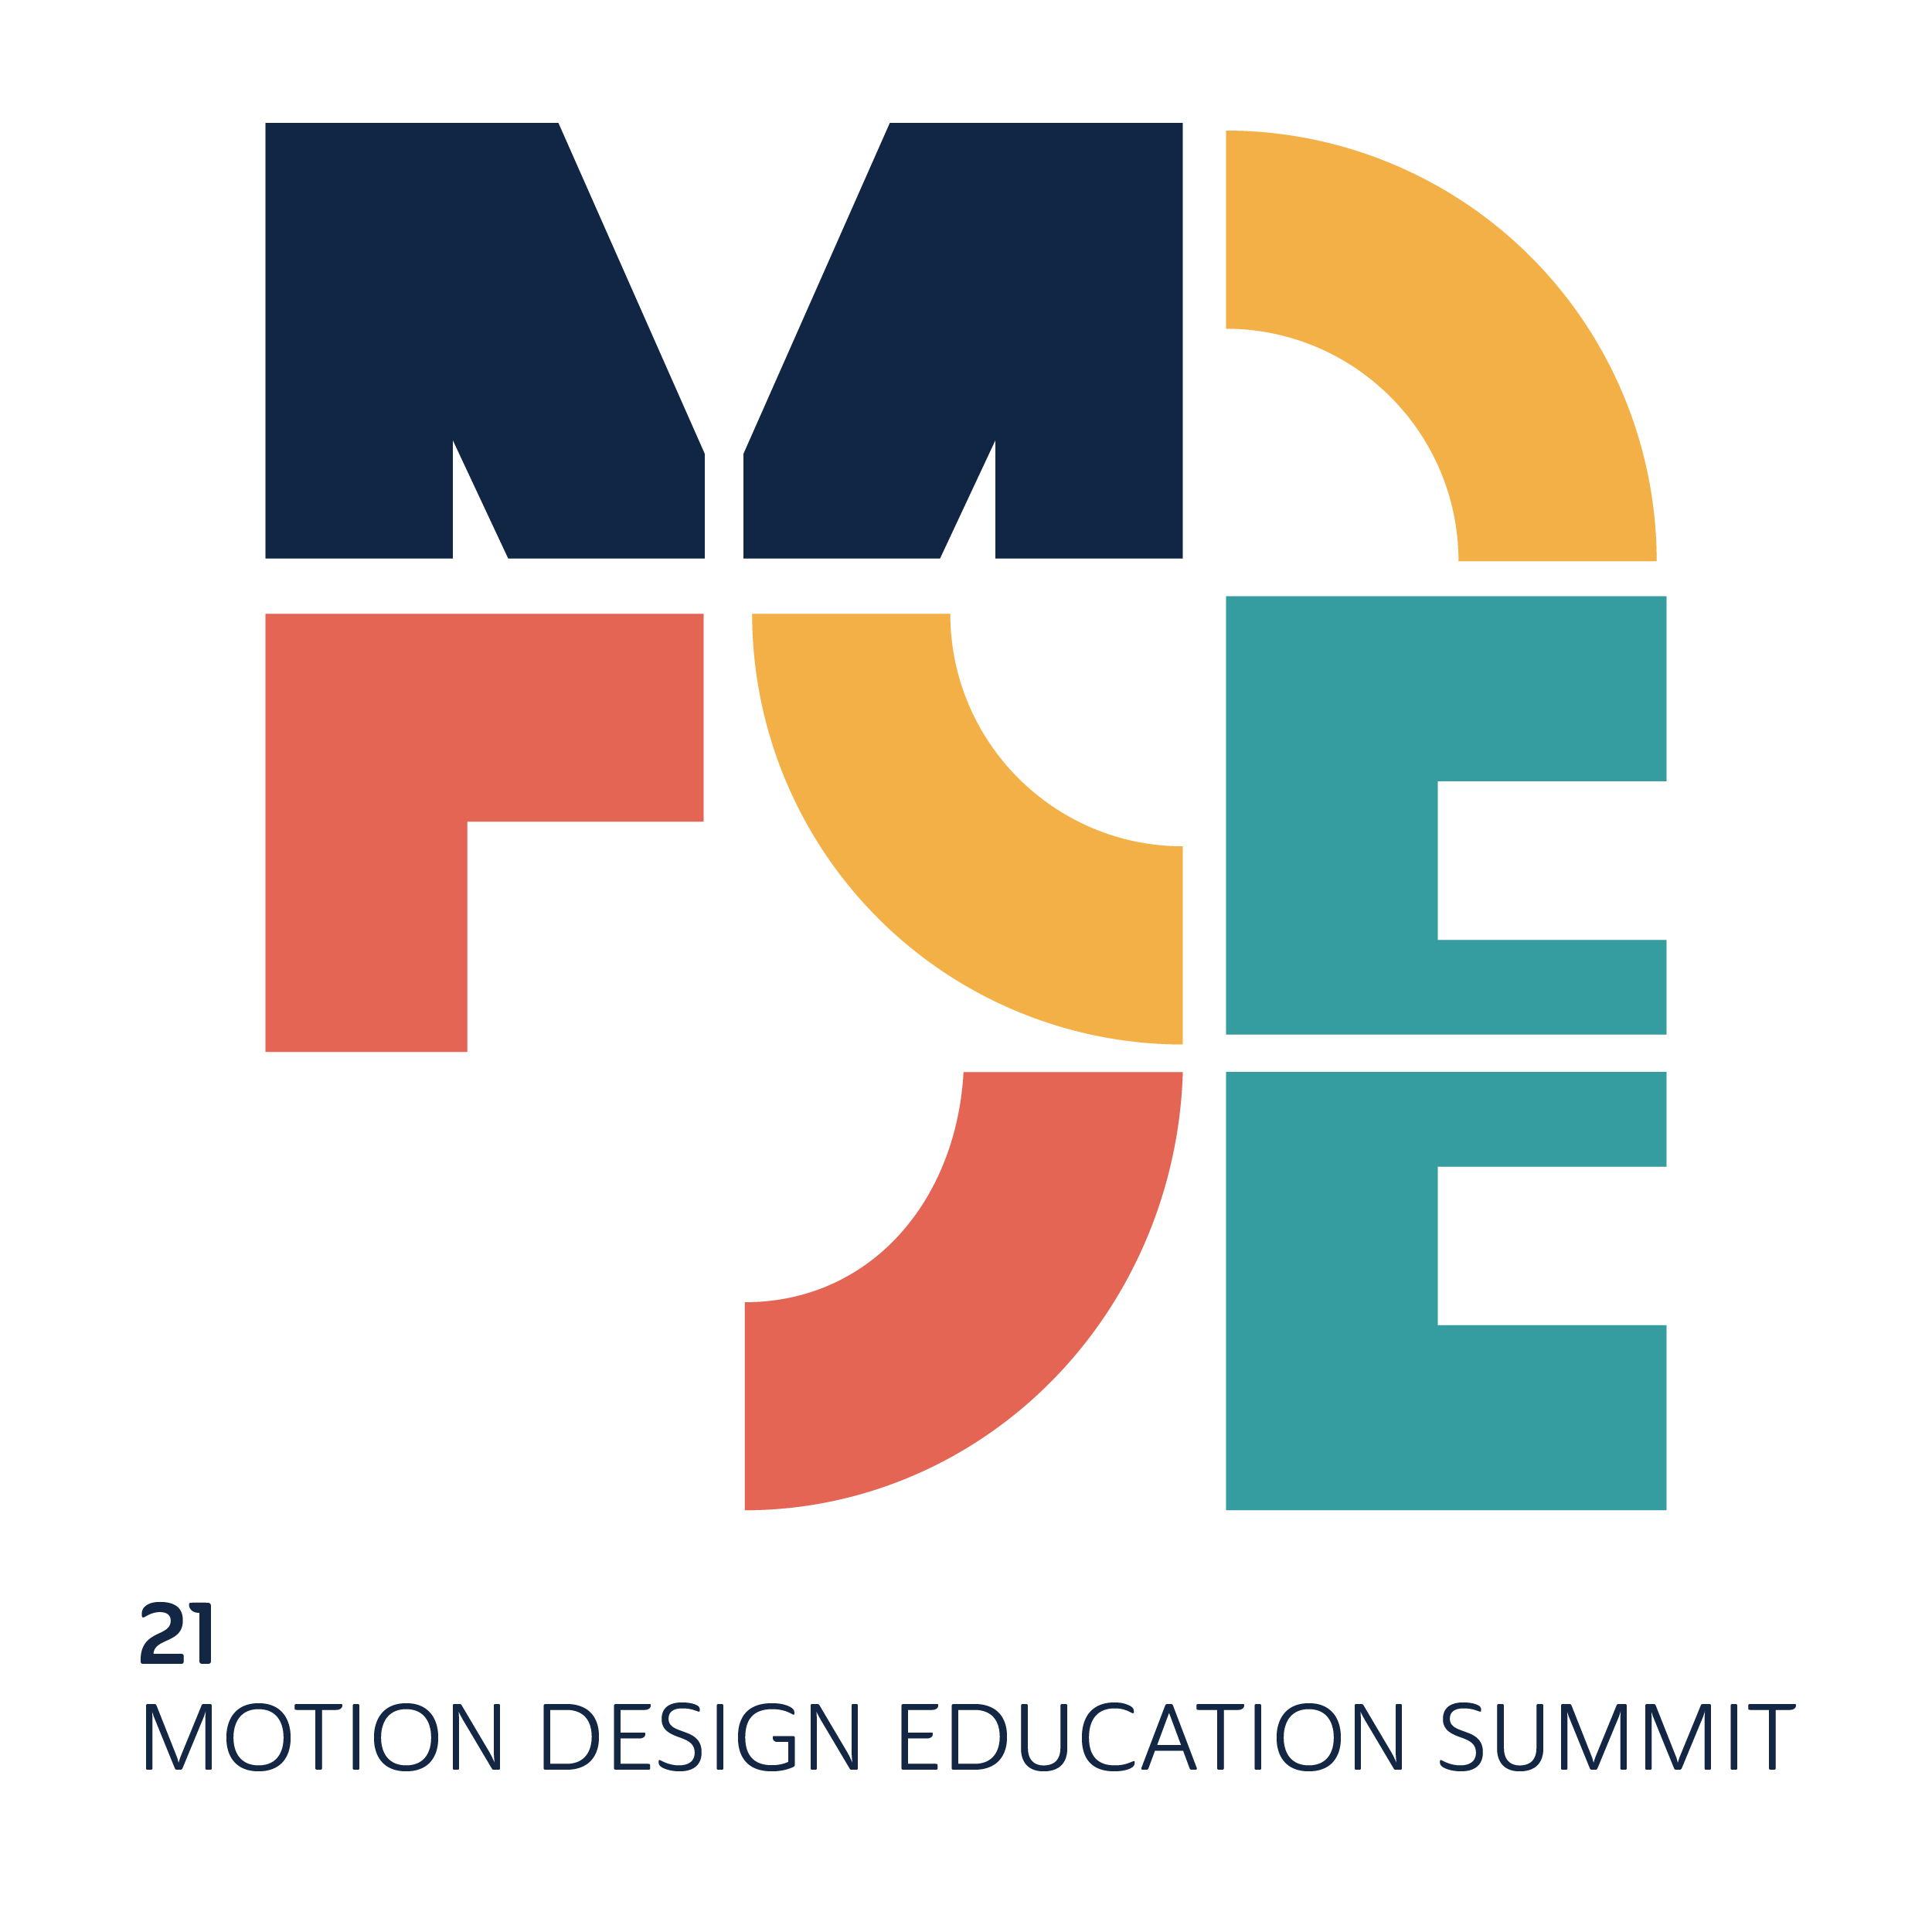 The image shows fragments of the letters that form the word mode arranged in an artistic way. It also displays 21 Motion Design Education Summit